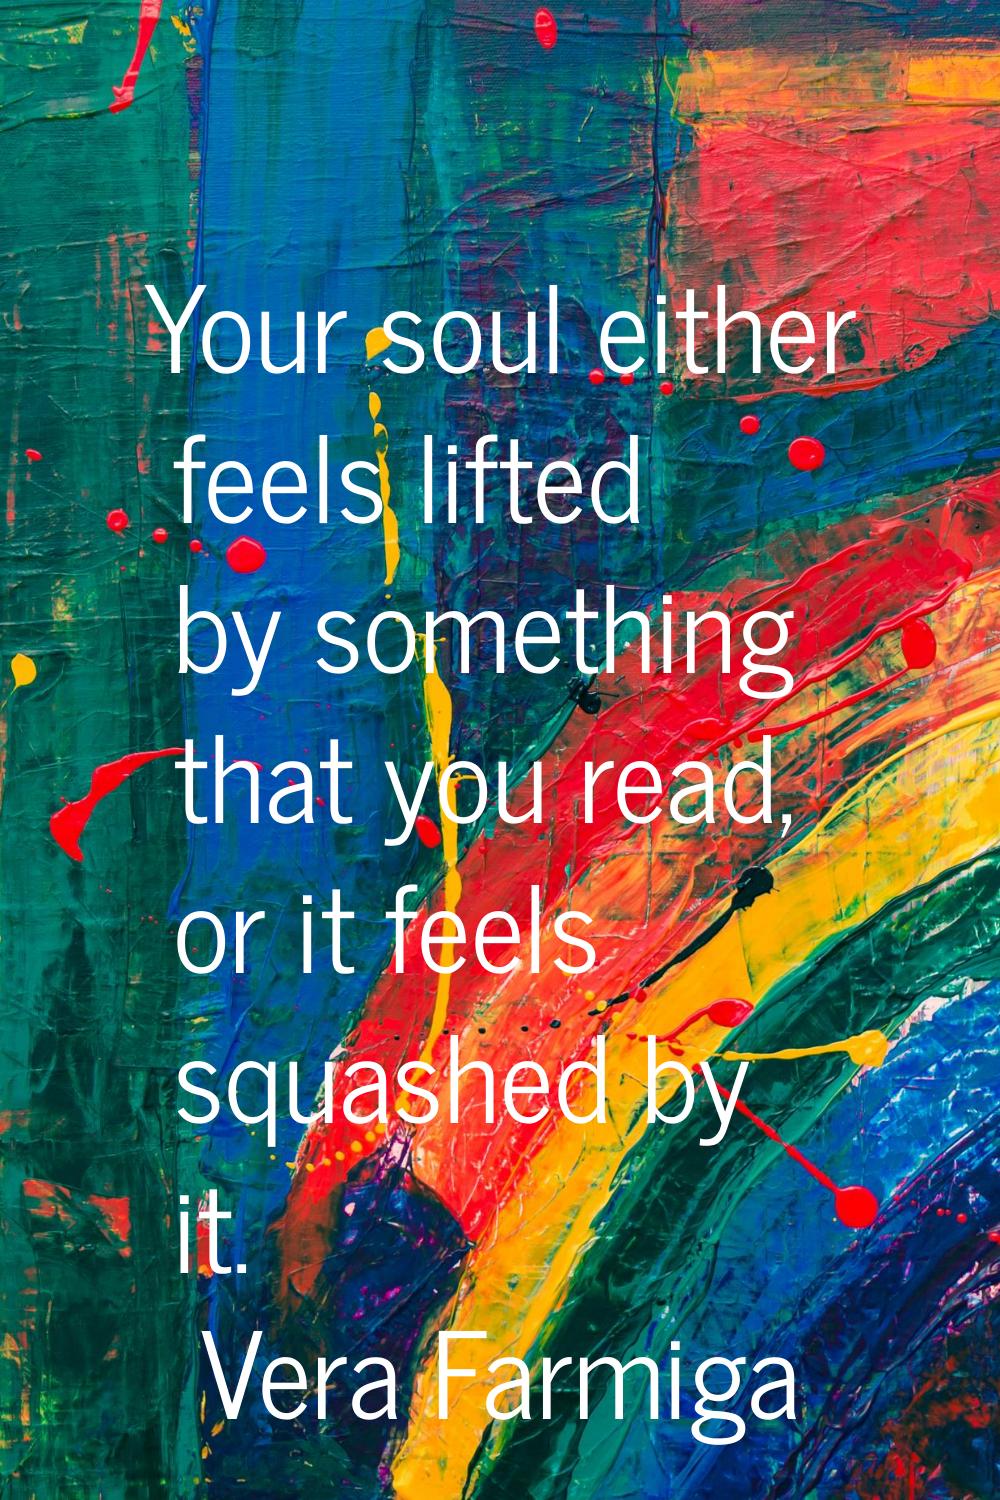 Your soul either feels lifted by something that you read, or it feels squashed by it.